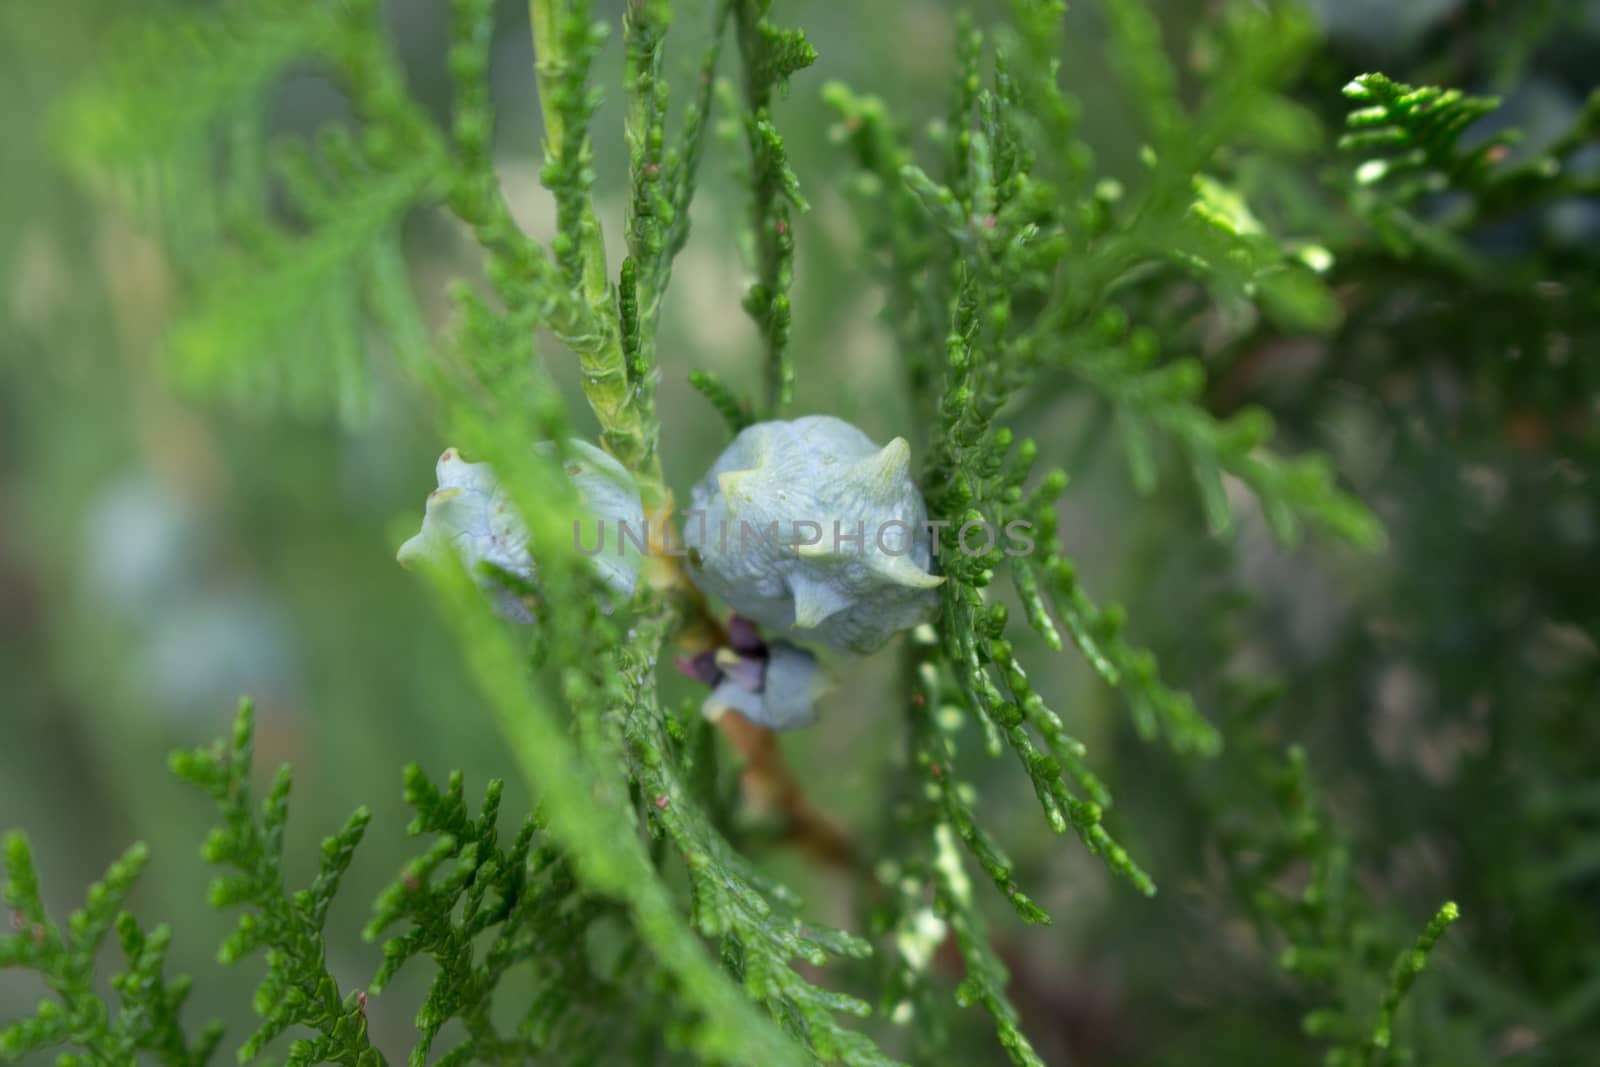 A thuja branch with bud